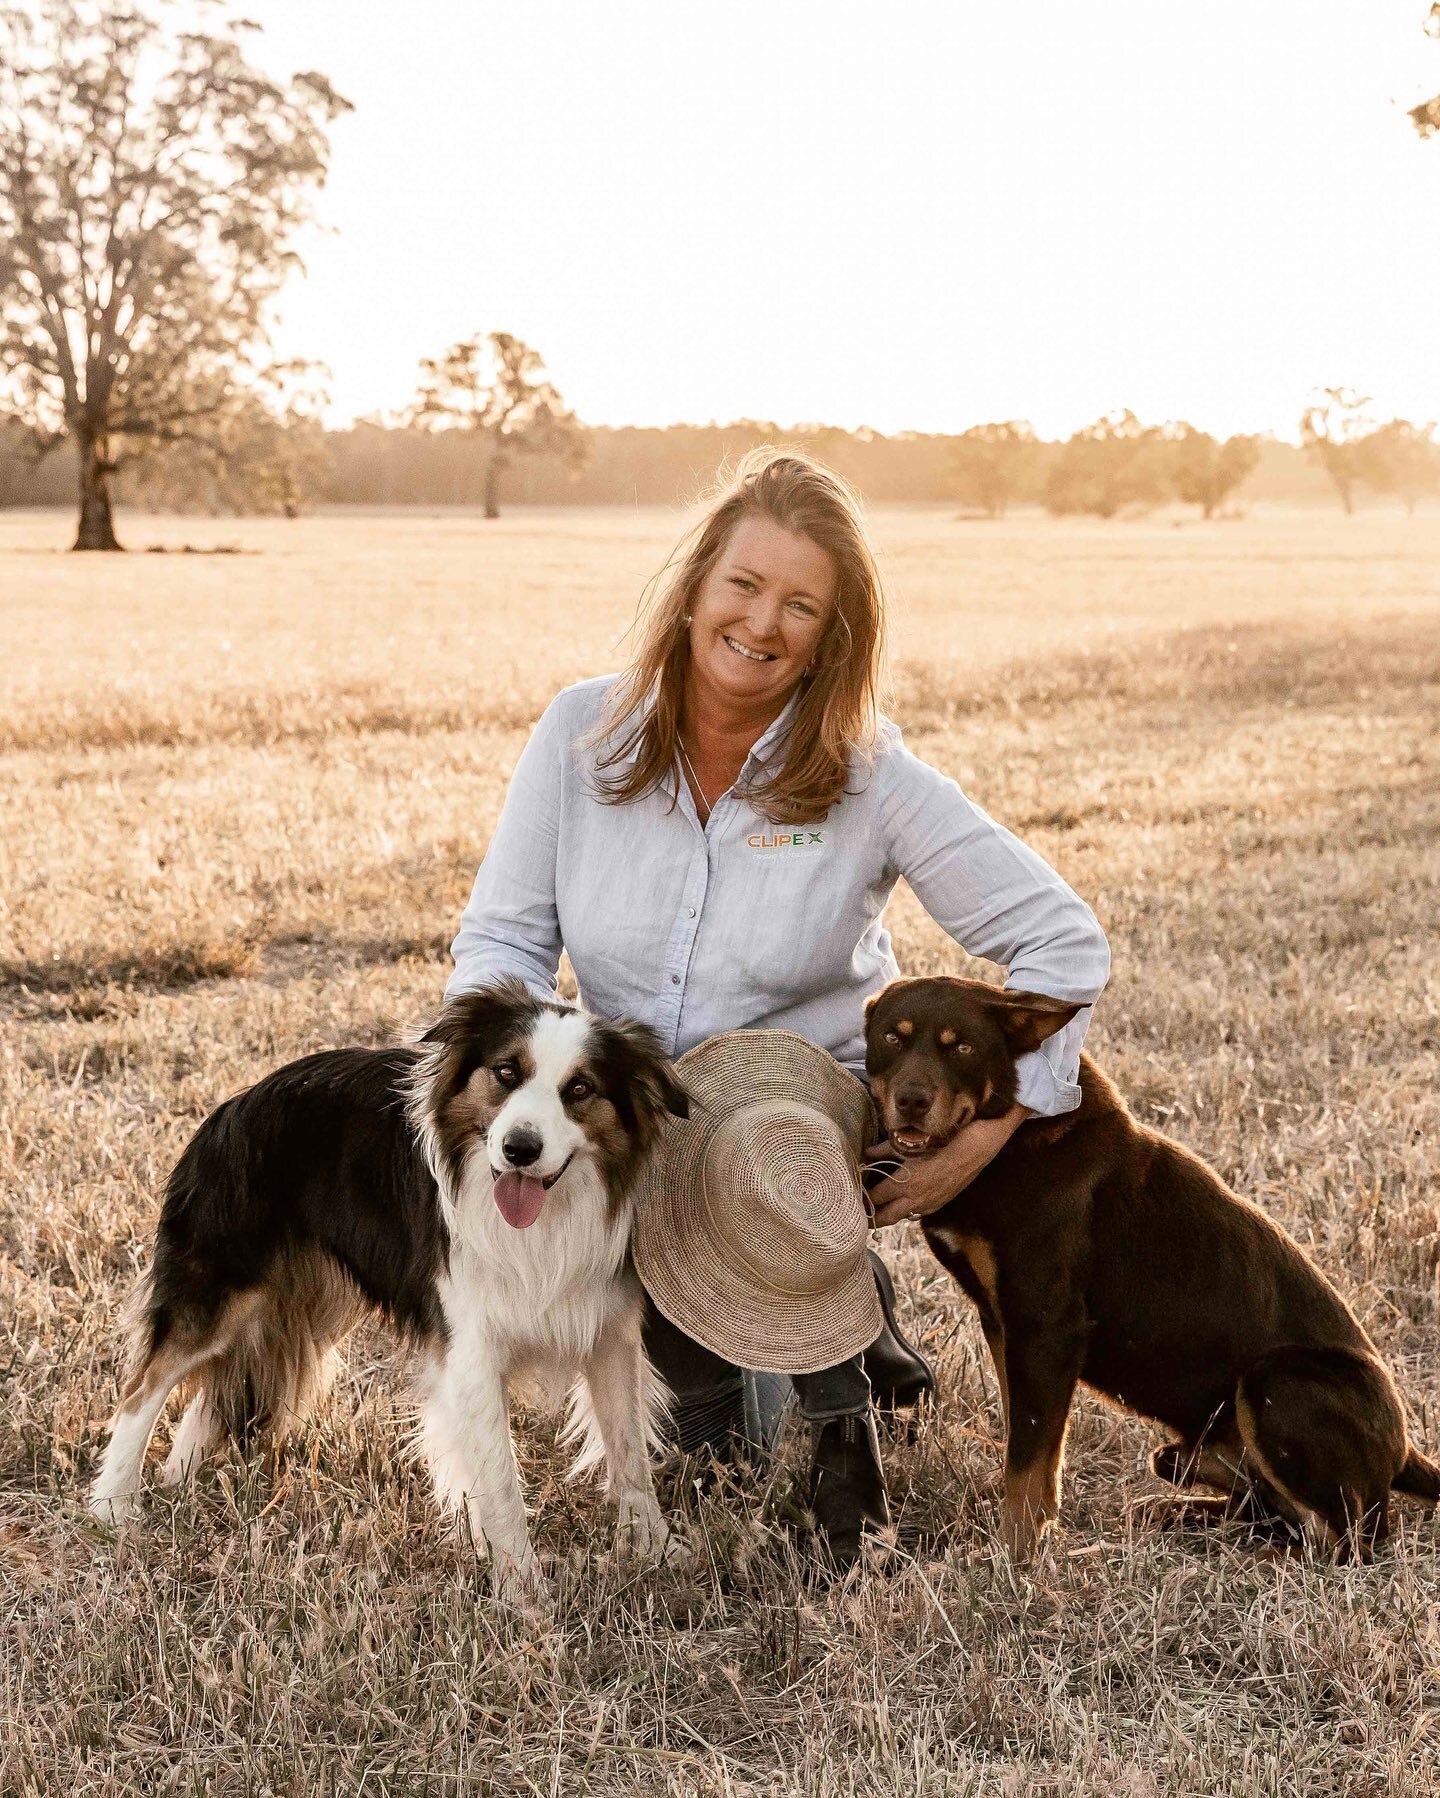 So behind on sharing photoshoot posts, but here&rsquo;s a few of my favorites from the most beautiful evening at the foot of the Grampians for @clipexaustralia&rsquo;s new Women in Ag campaign. 

Couldn&rsquo;t have a better lineup of rural women to 